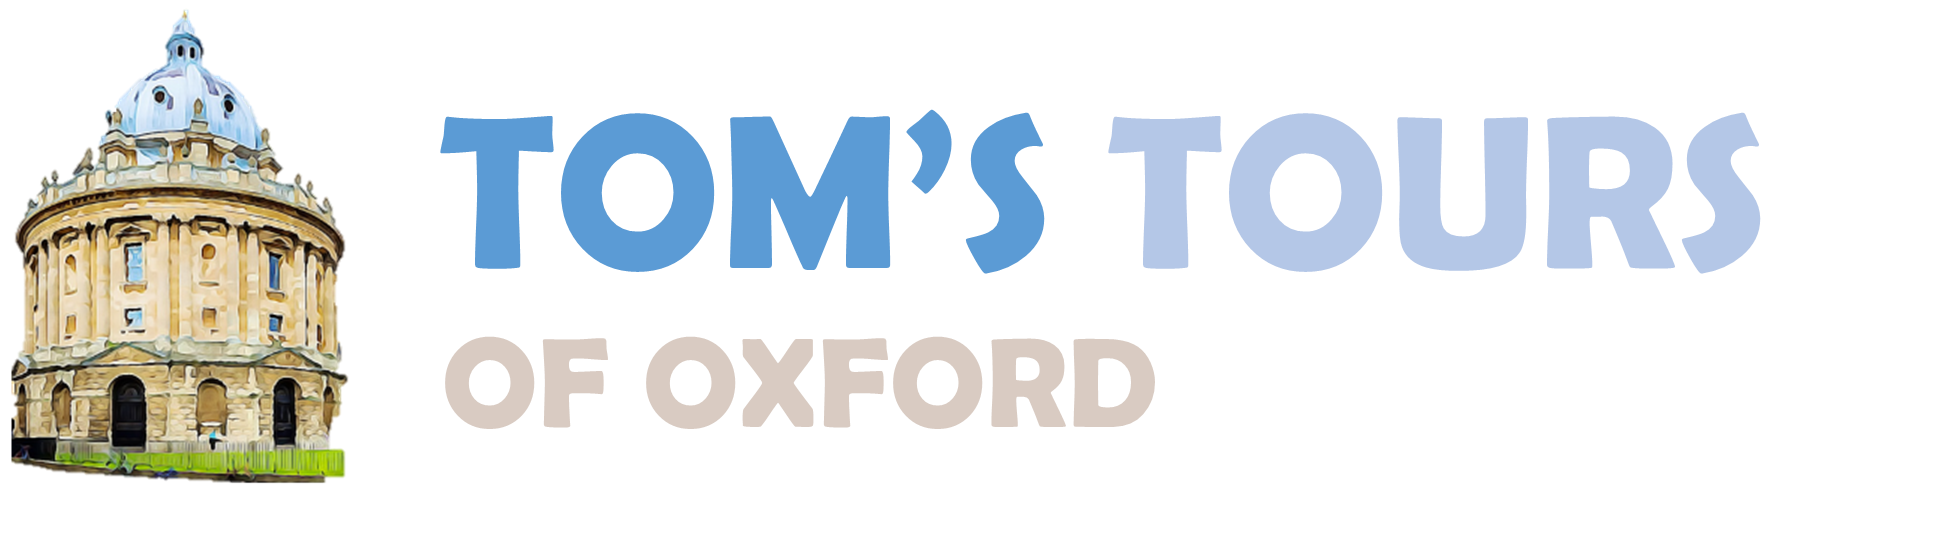 Tom's Tours of Oxford